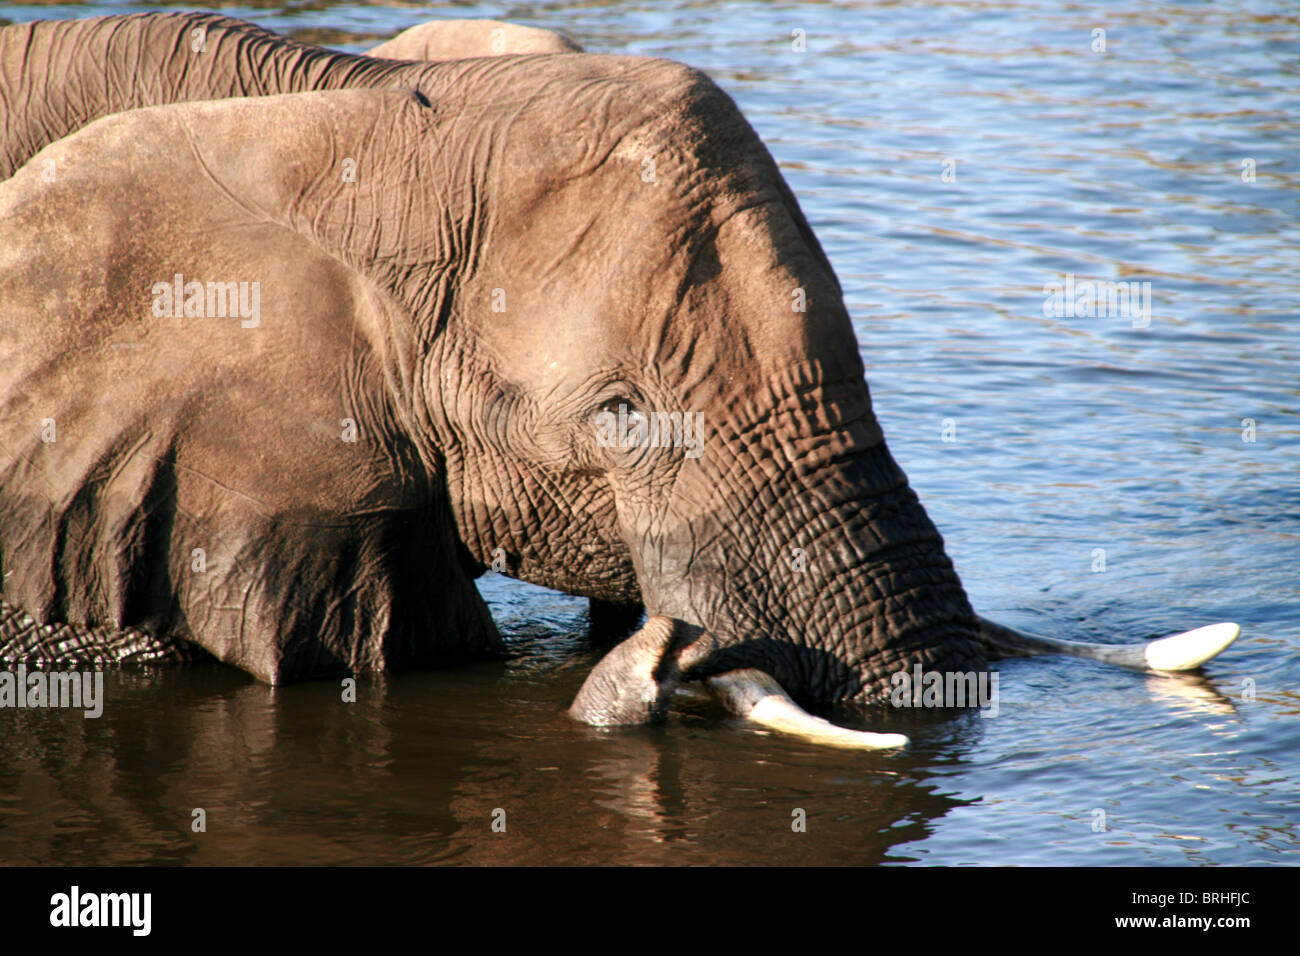 An elephant seeks to cool down in a river, Chobe National Park, Botswana. Stock Photo